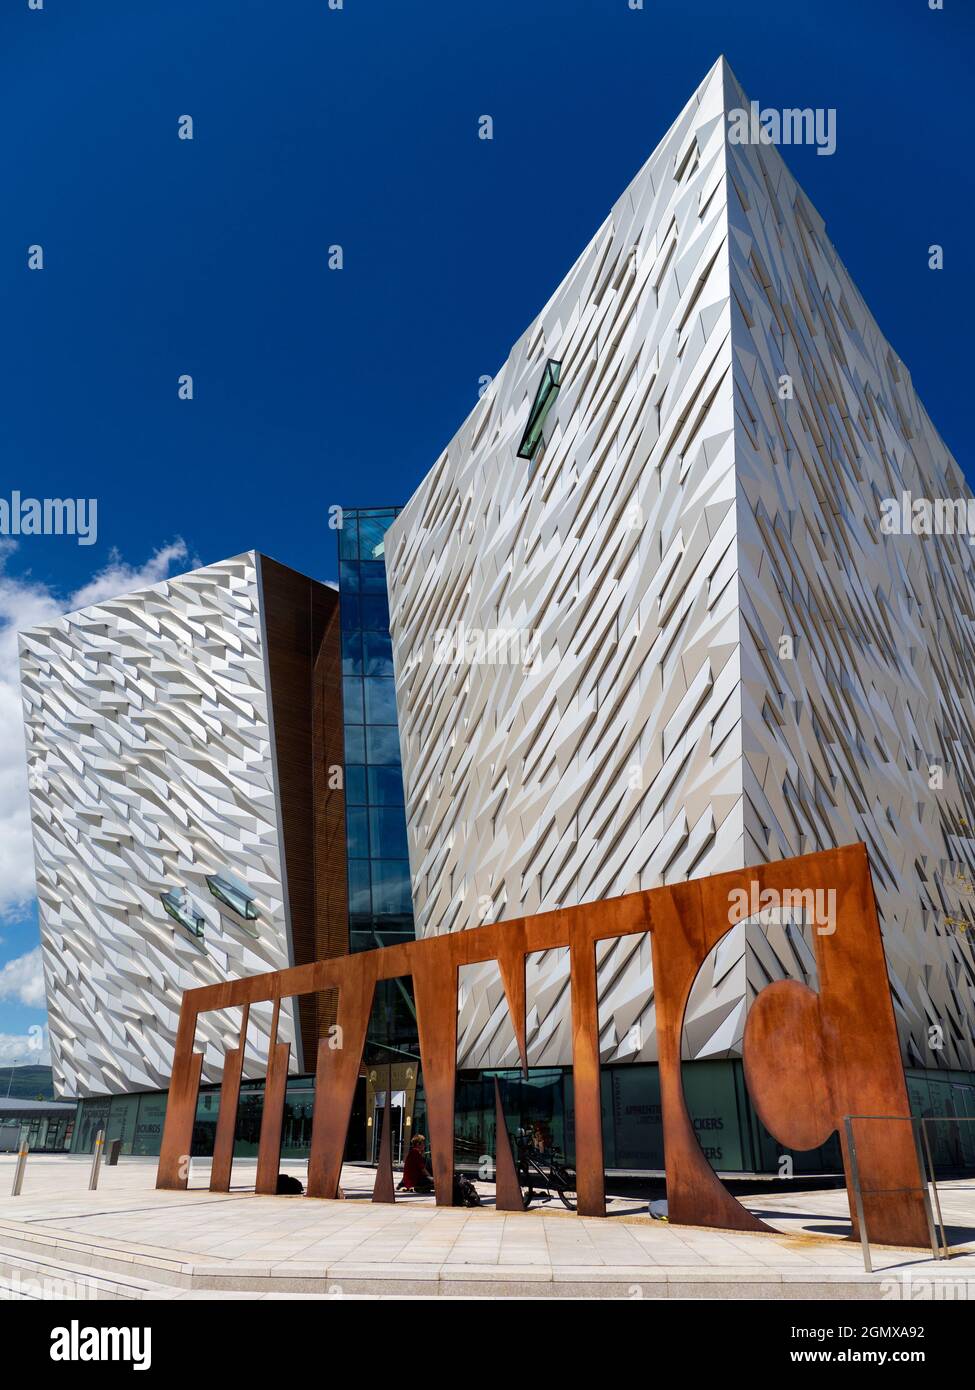 In Northern Ireland, they have managed to turn a world-famous shipping disaster into a fine tourist attraction. Ulster folk will always tell you that Stock Photo